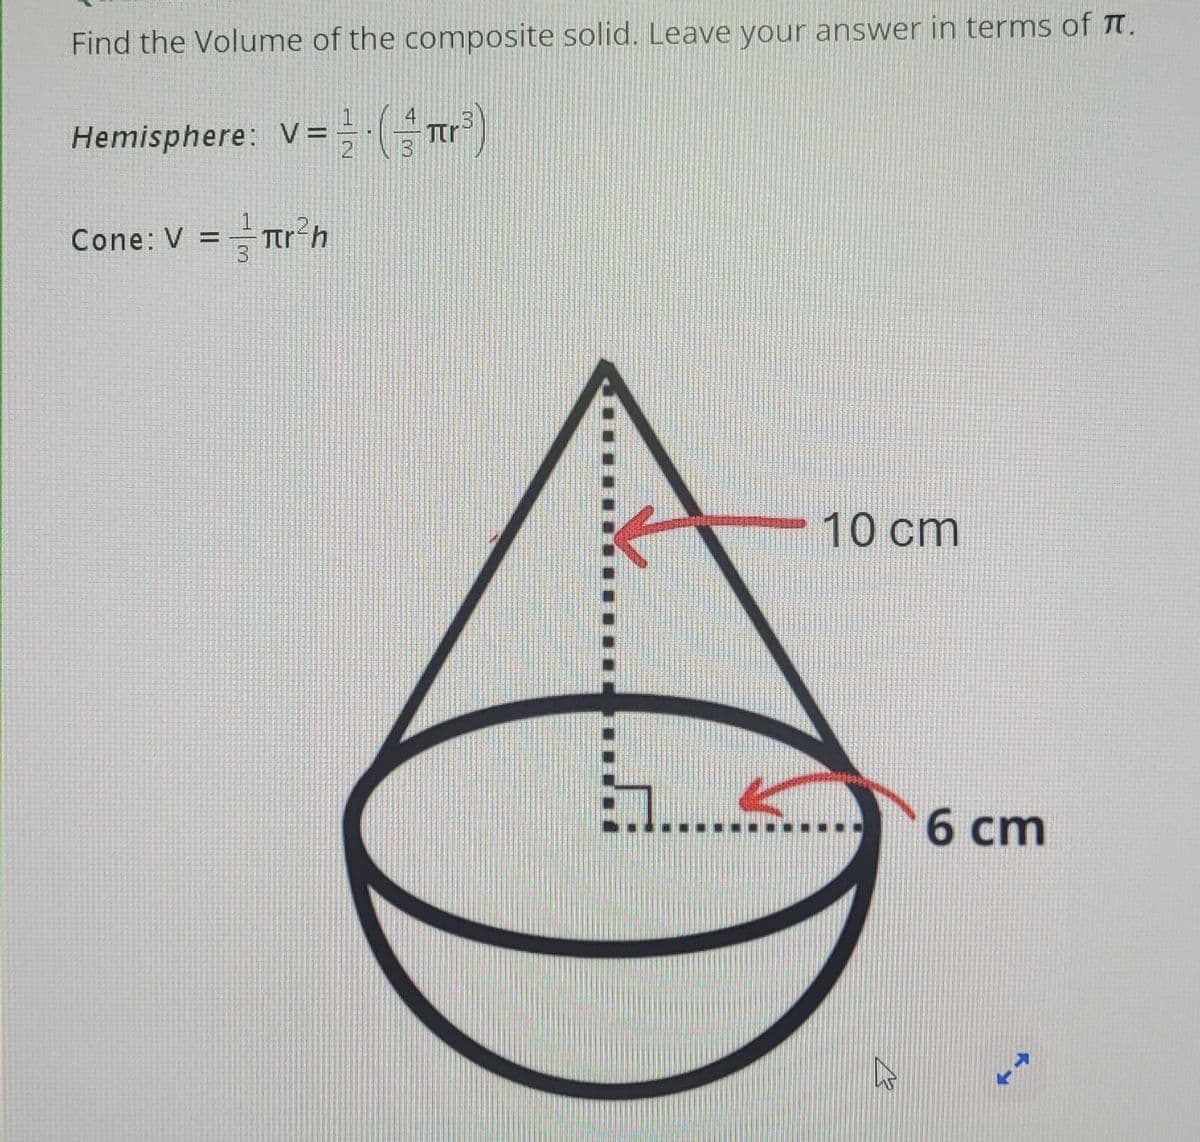 Find the Volume of the composite solid. Leave your answer in terms of π.
Hemisphere: V = (4πr³)
Cone: V = πr²h
10 cm
6 cm